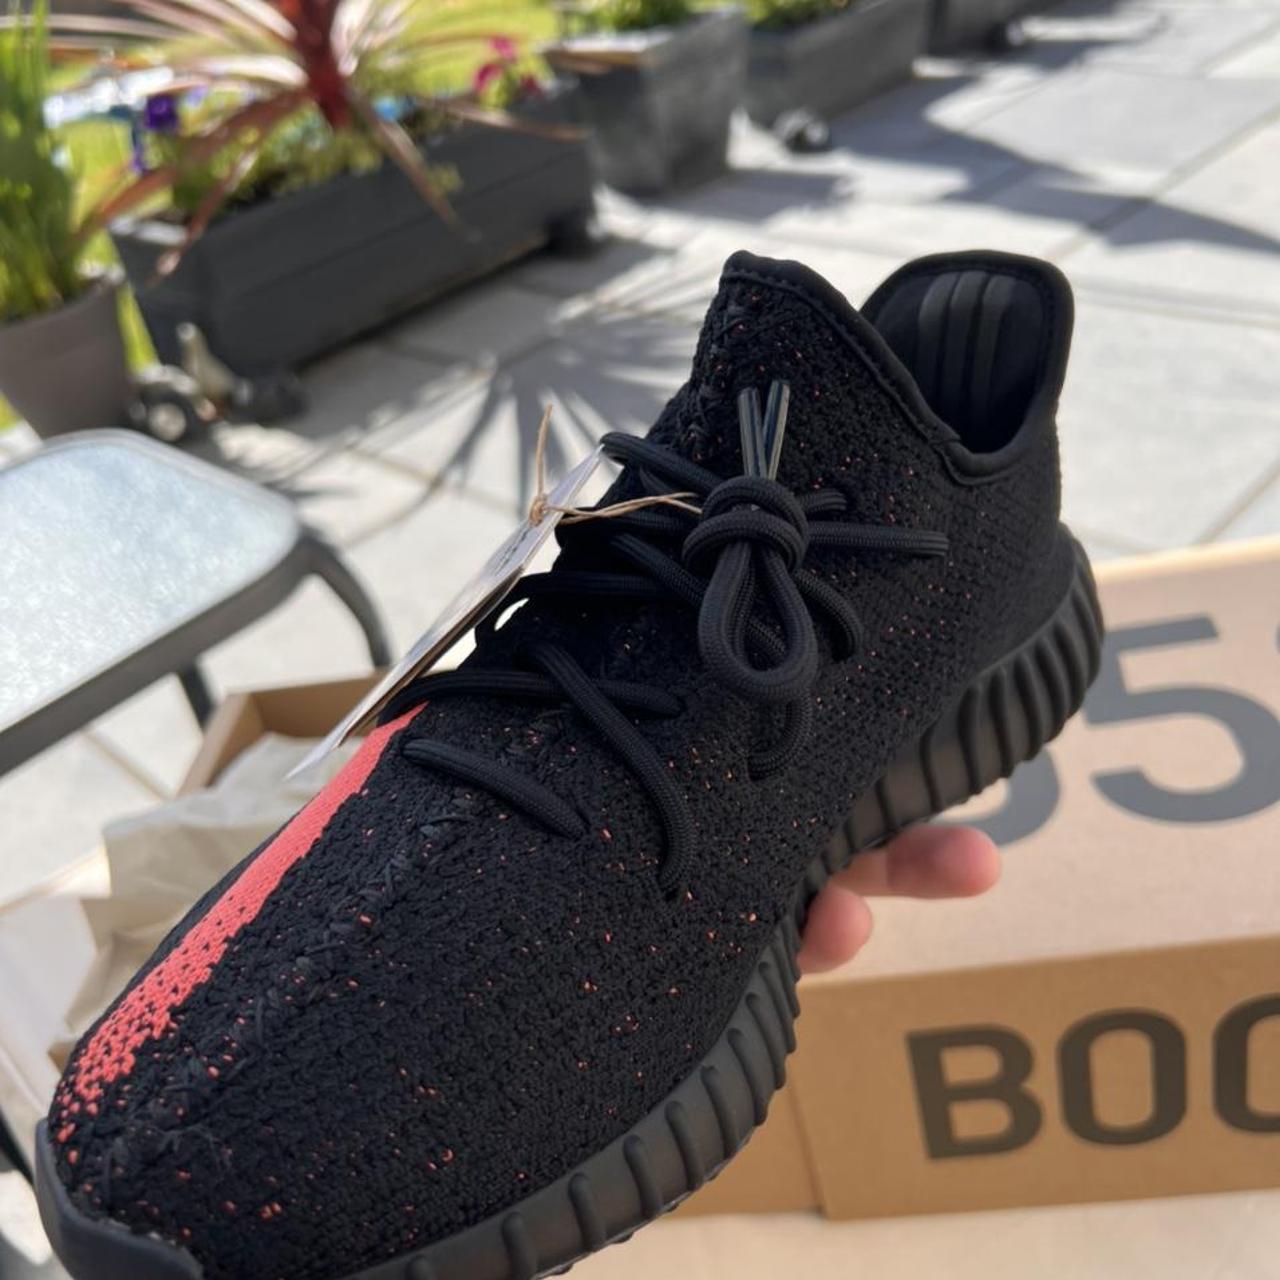 Adidas Yeezy Boost 350 v2 Supreme Comes new In Box - Depop